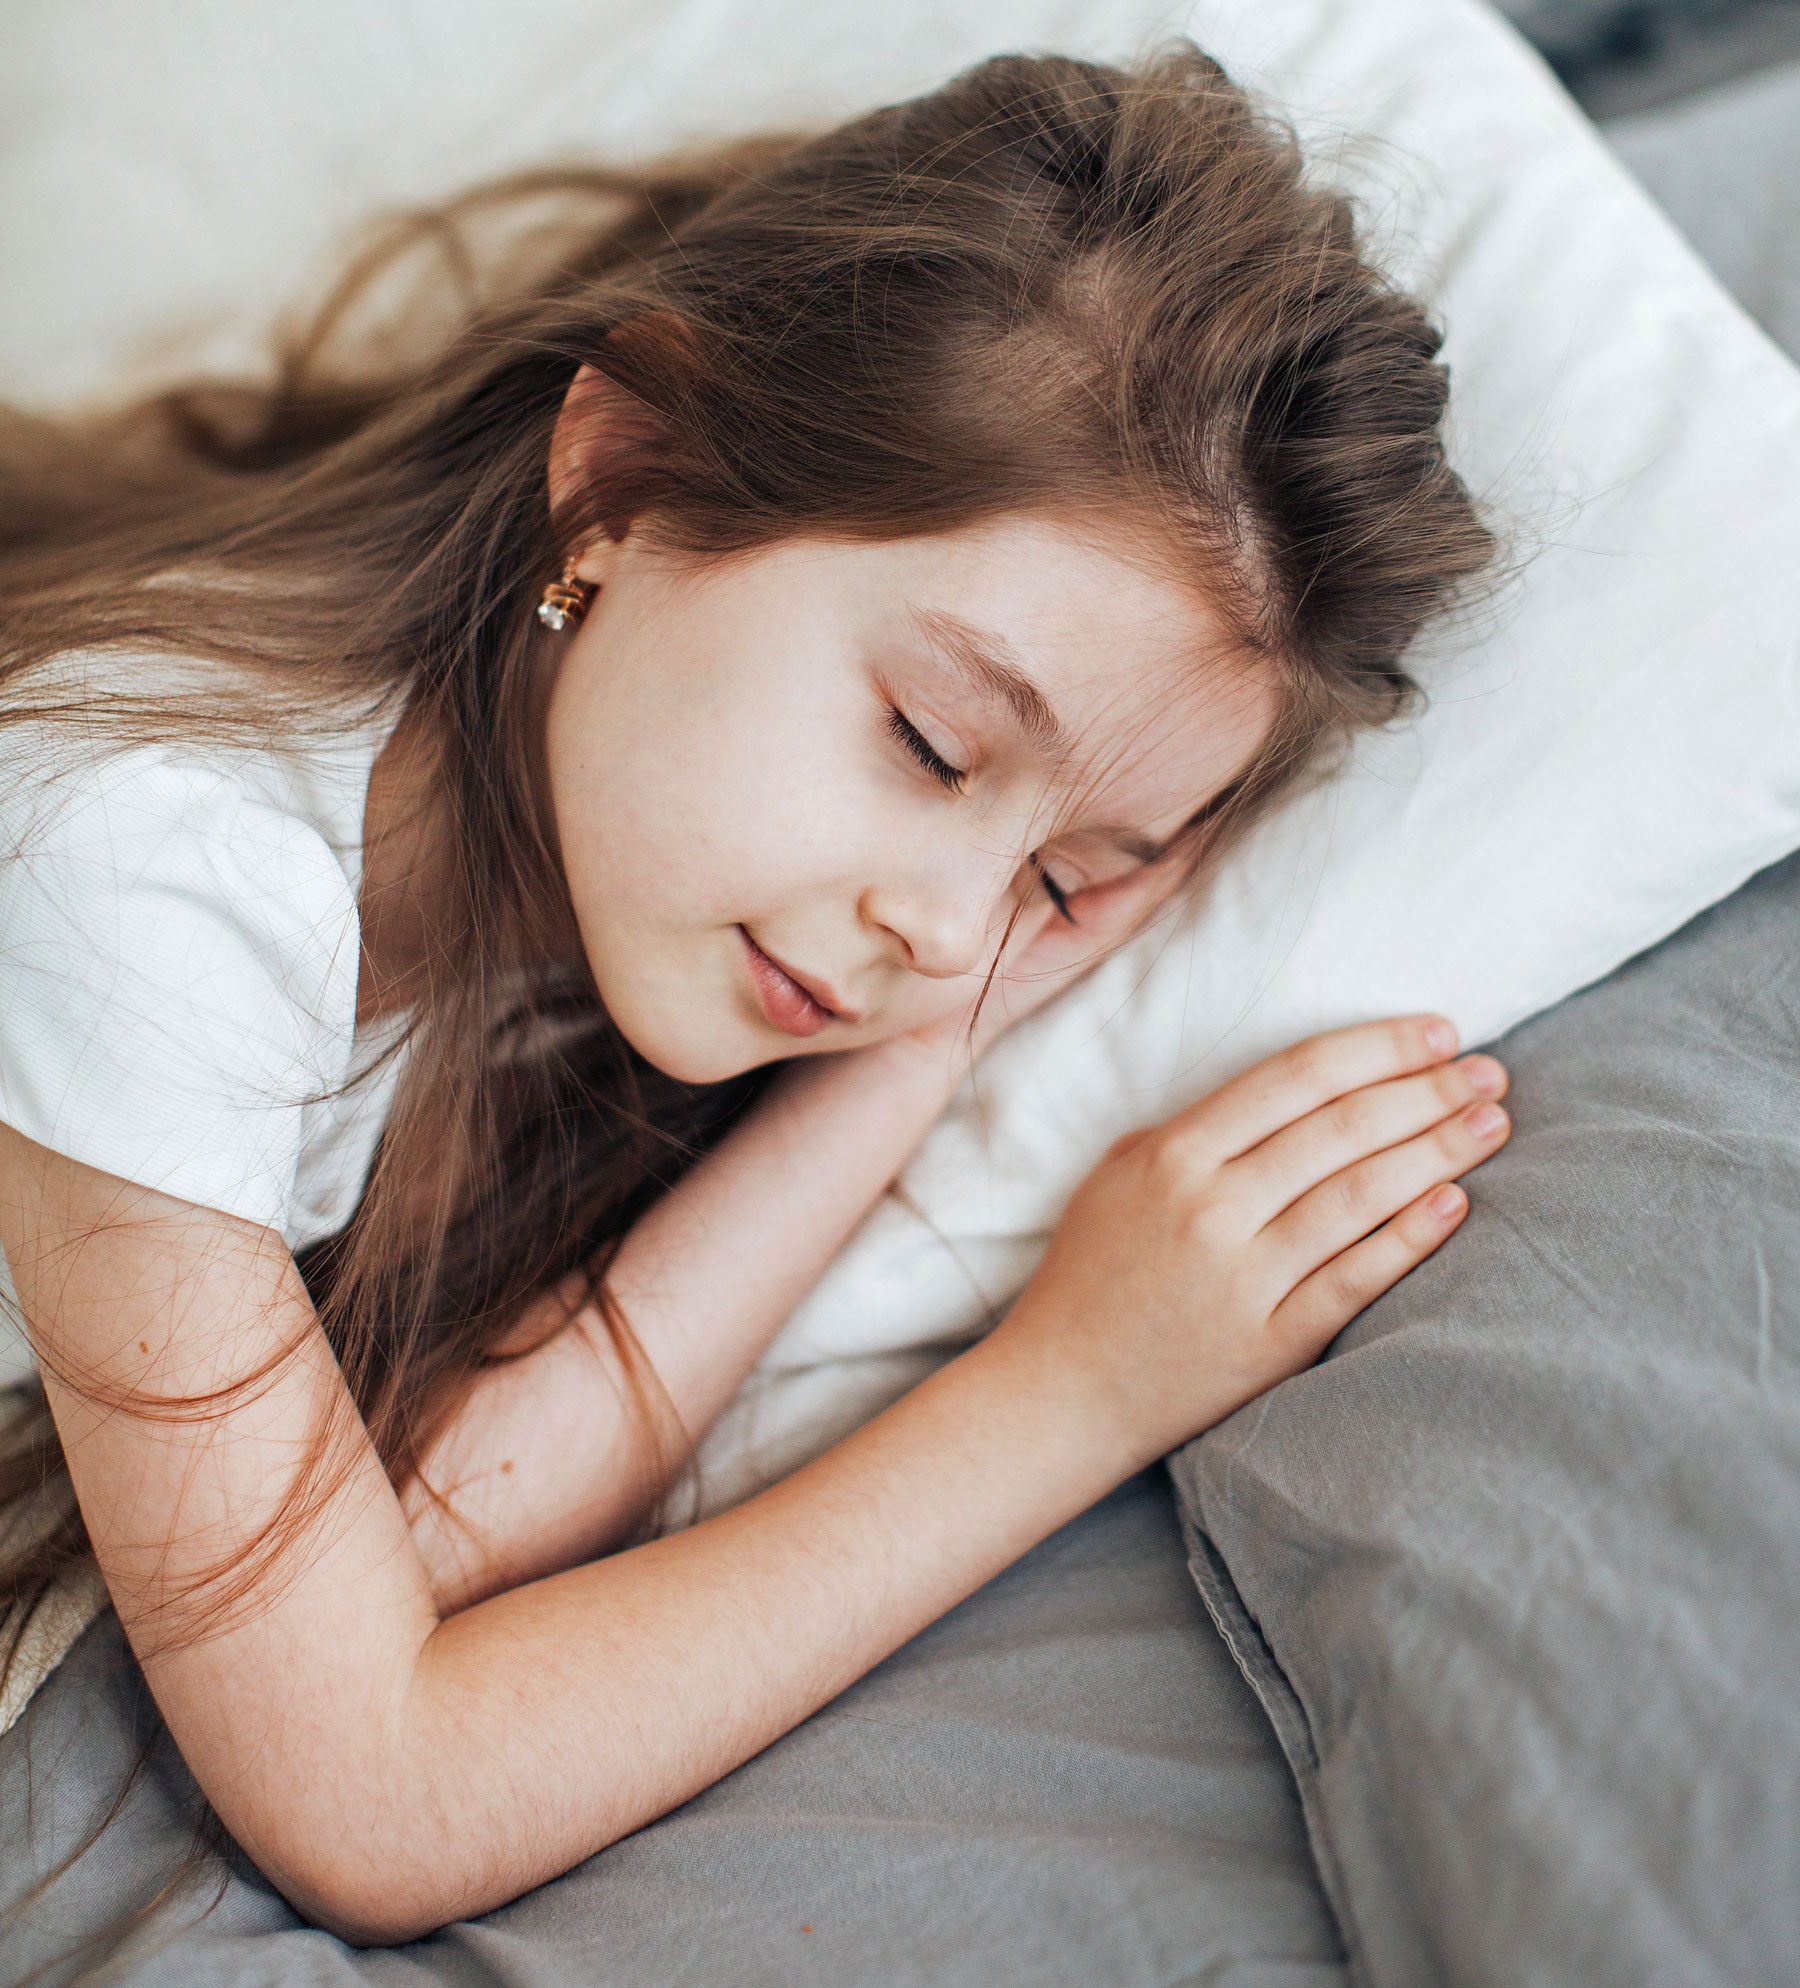 The Land of Nod - Is Your Child Getting Enough Sleep?